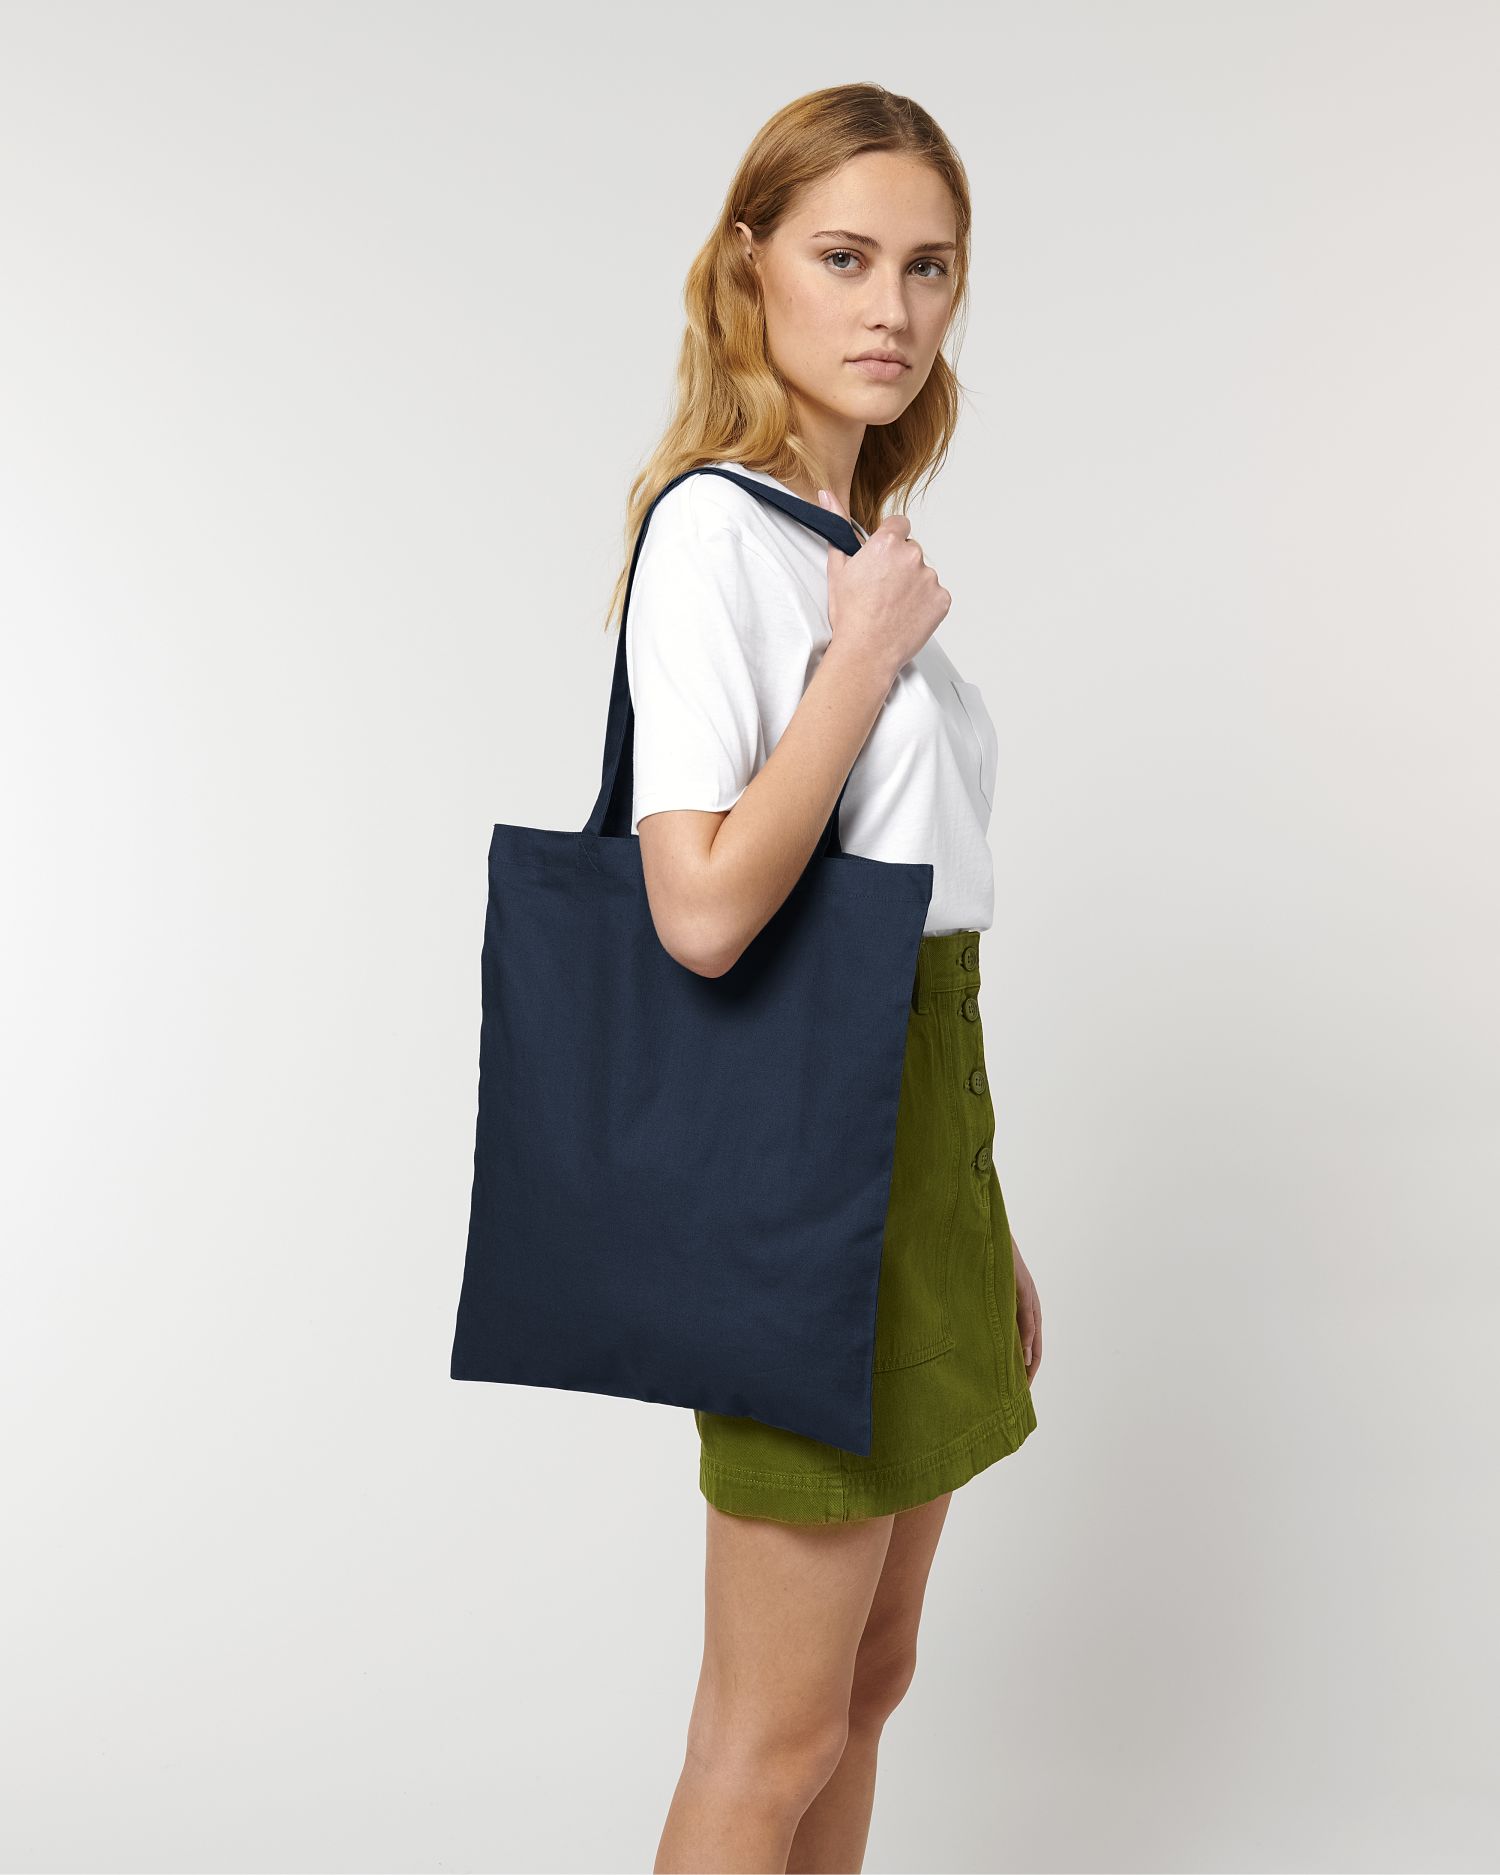  Light Tote Bag in Farbe French Navy